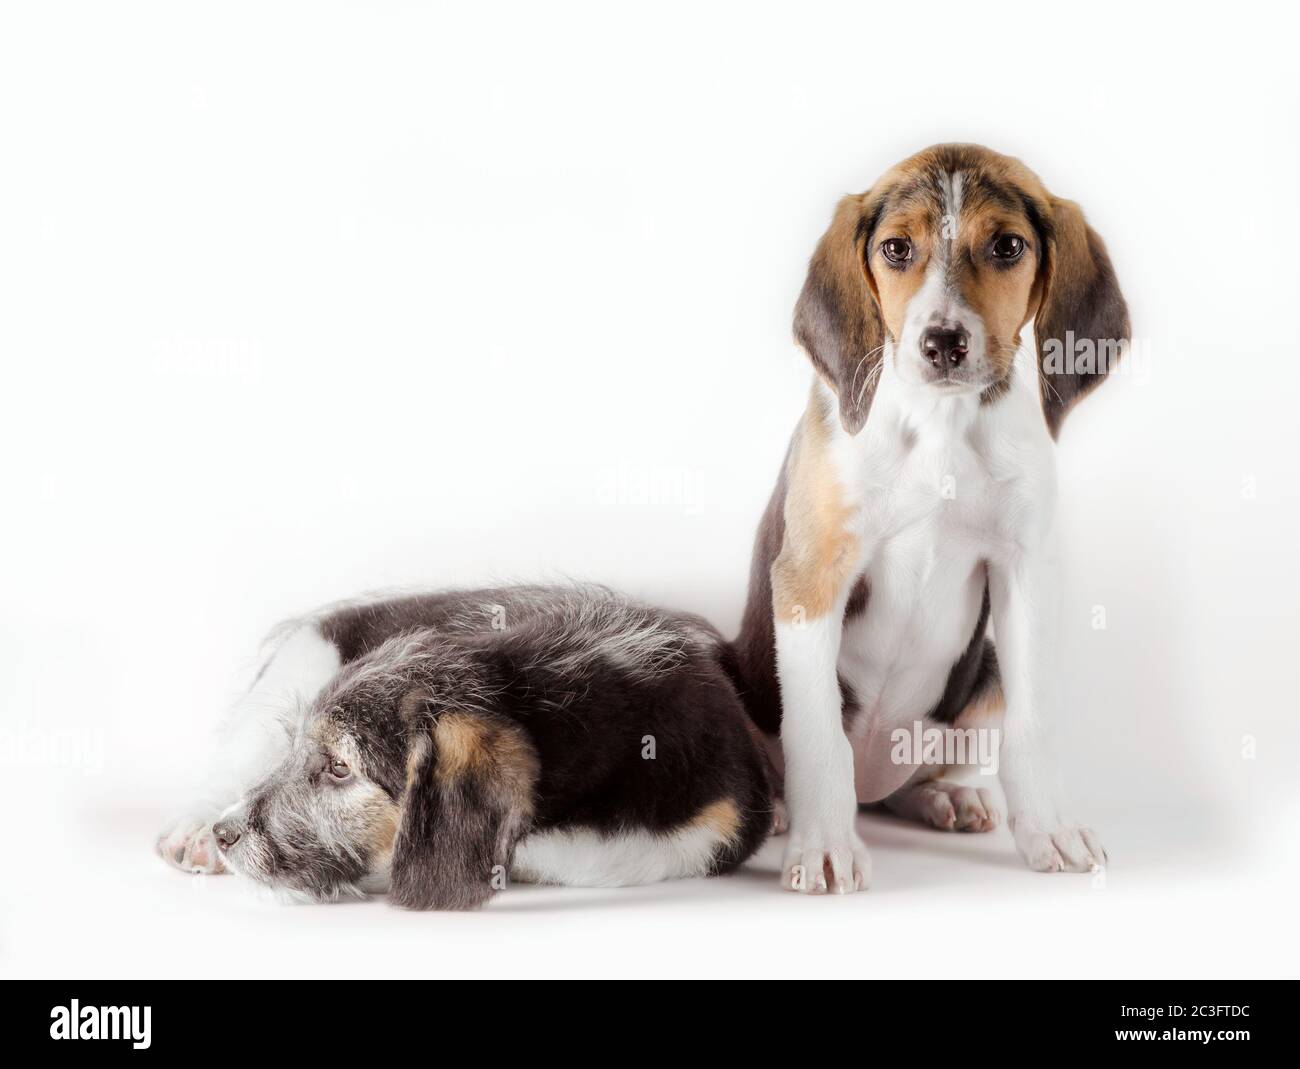 pair of mutts puppy on a white background Stock Photo